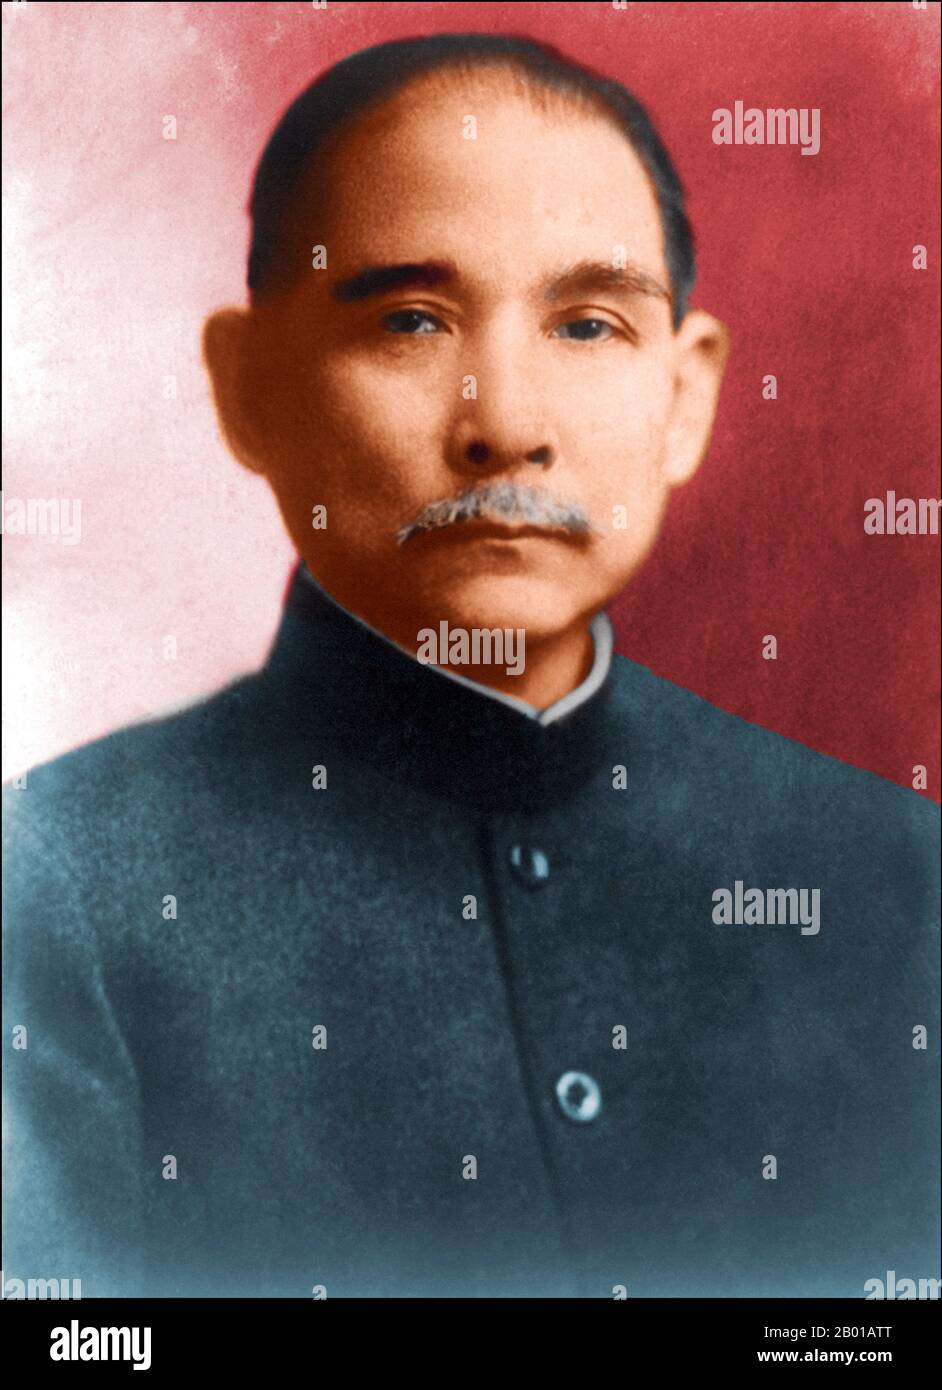 Sun Yat-sen was a Chinese revolutionary and political leader. As the foremost pioneer of Nationalist China, Sun is frequently referred to as the Founding Father of Republican China.  Sun played an instrumental role in inspiring the overthrow of the Qing Dynasty, the last imperial dynasty. Sun was the first provisional president when the Republic of China (ROC) was founded in 1912 and later co-founded the Chinese National People's Party or Kuomintang (KMT), where he served as its first leader. Sun was a uniting figure in post-Imperial China, and is revered by both sides of the Taiwan Strait. Stock Photo